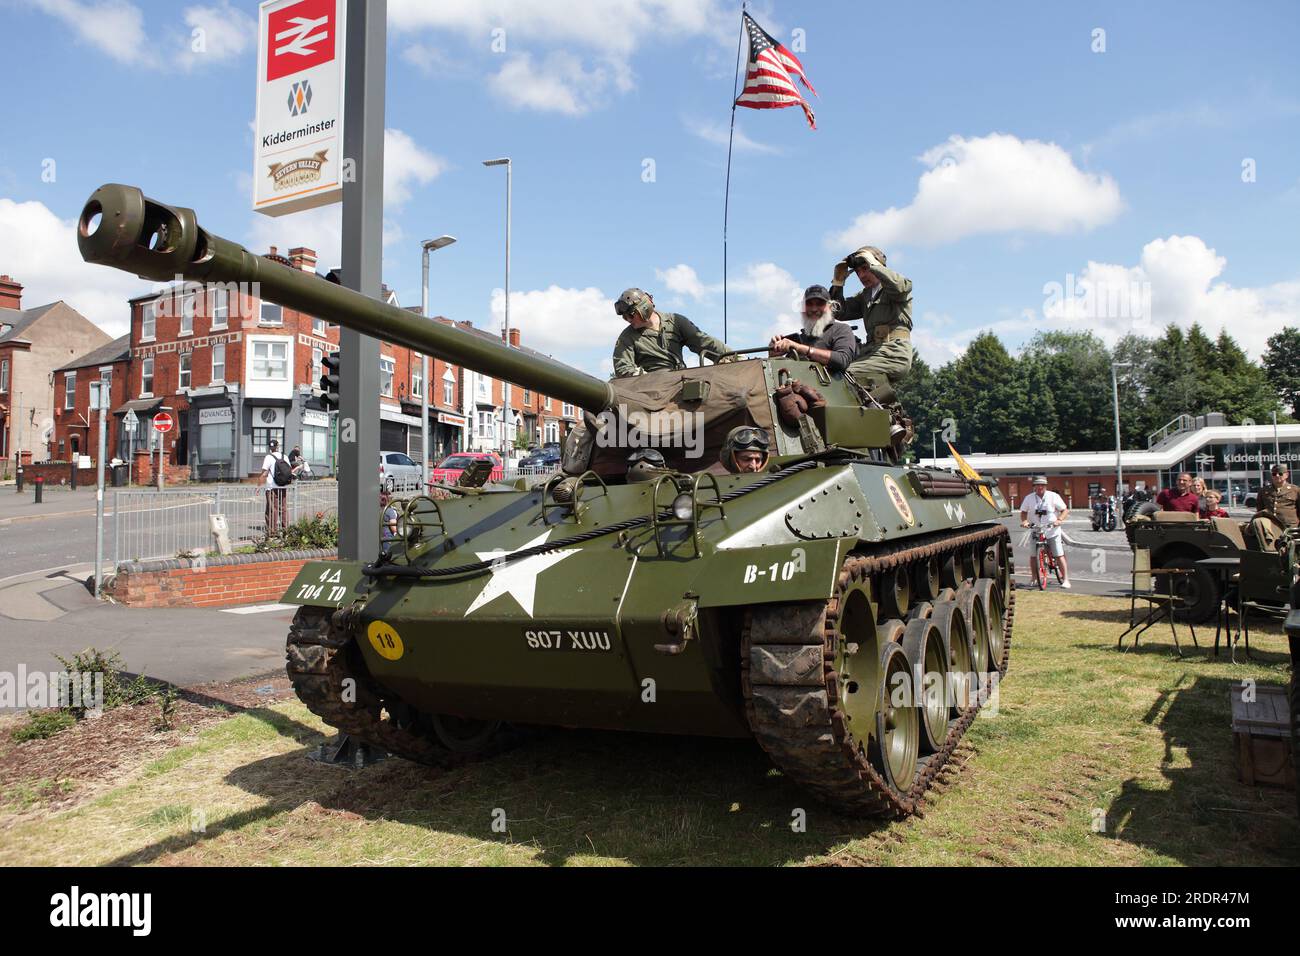 A fine example of an American Hellcat Tank outside Kidderminster Station during the Severn Valley Railway 1940s day. Stock Photo